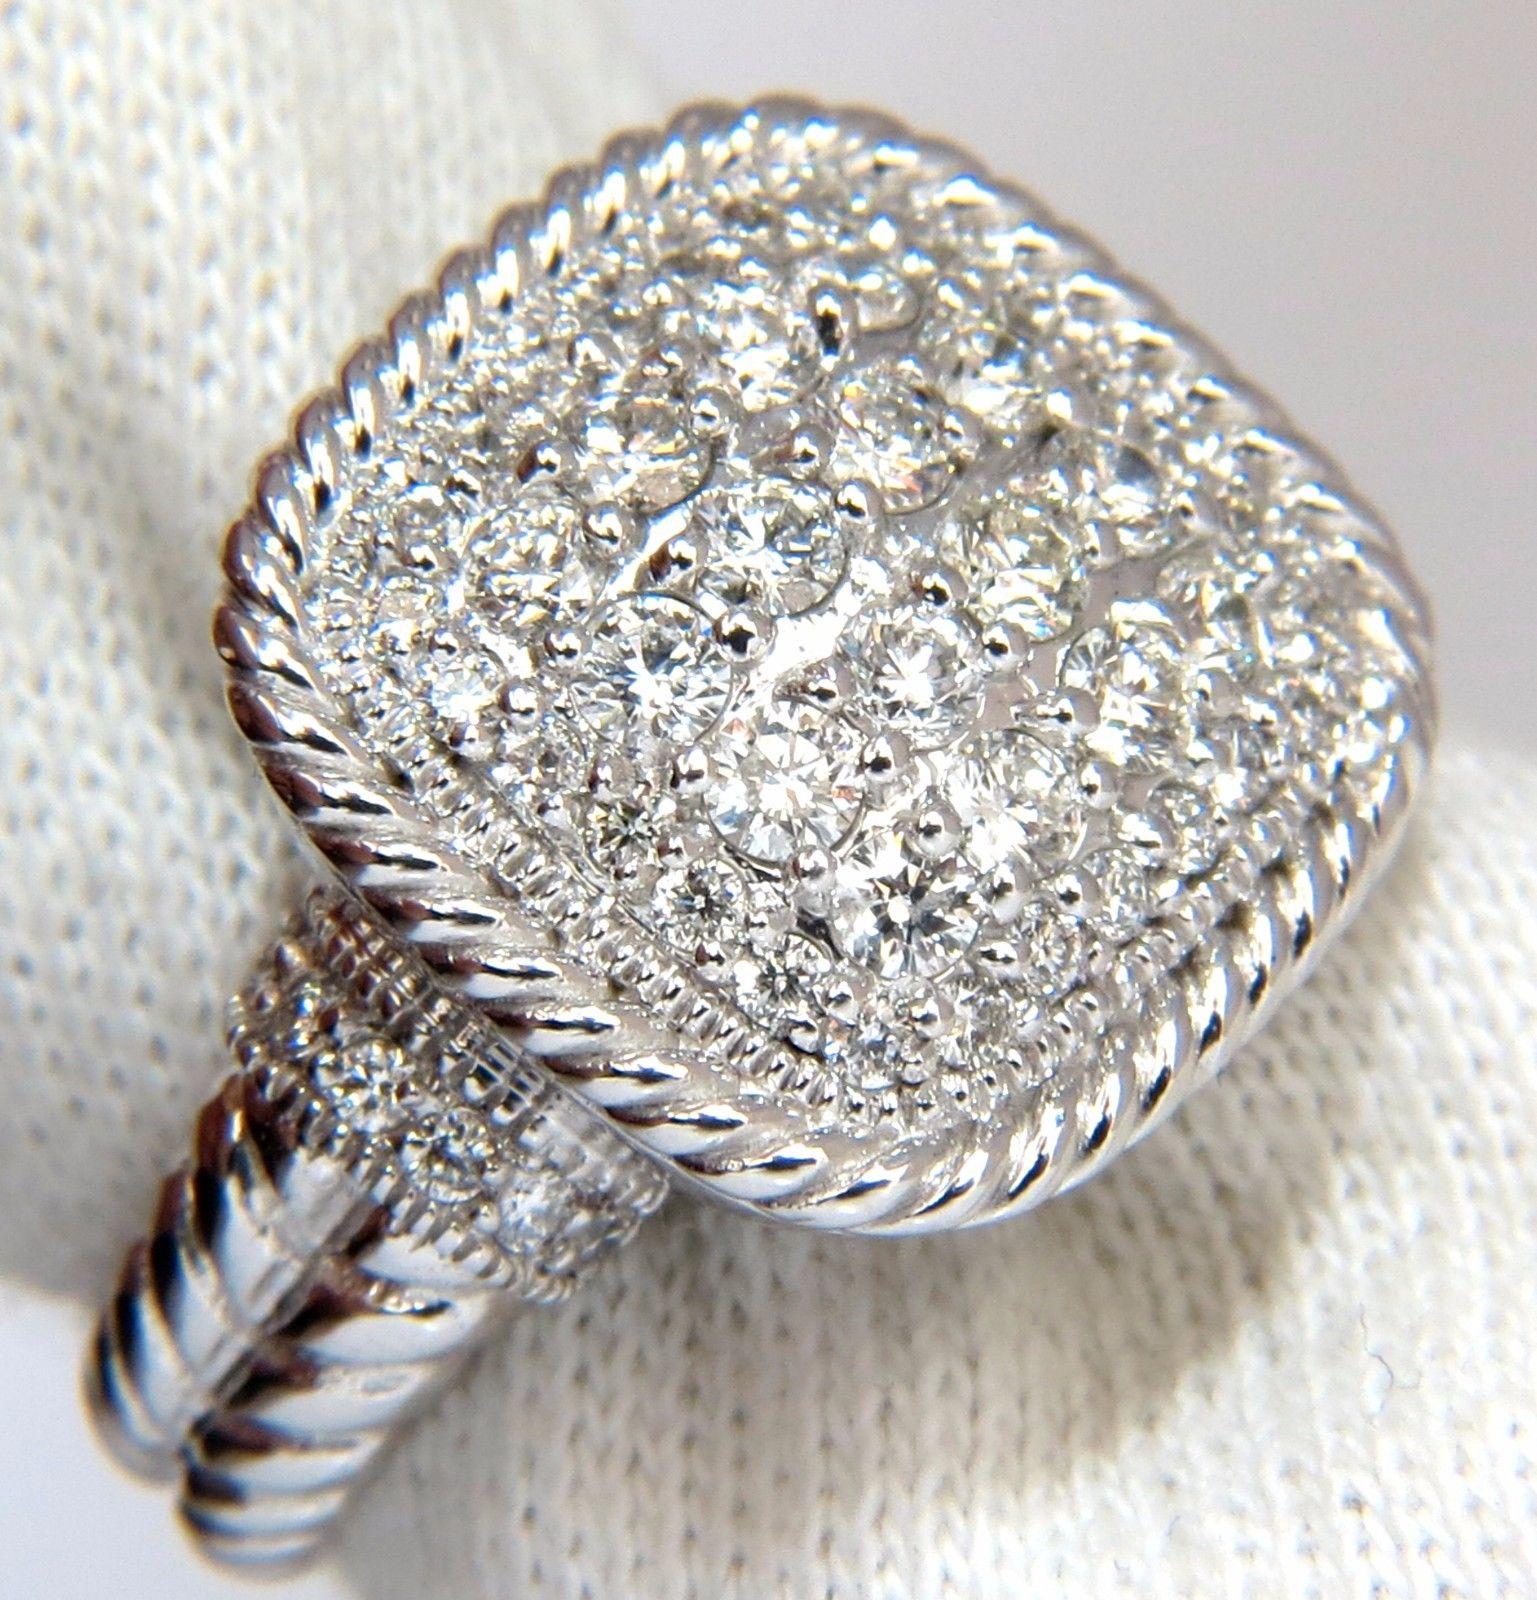 Double Shank & Rope Twist Dome.

1.36ct. round brilliant natural diamonds ring.

G-color vs-2 clarity 

Very good Cuts

14kt white gold

11.5 grams

Ring Current size: 7 

Please inquire for sizing

Top of ring: 17  X 17mm

Depth: 8.6mm

$5,000